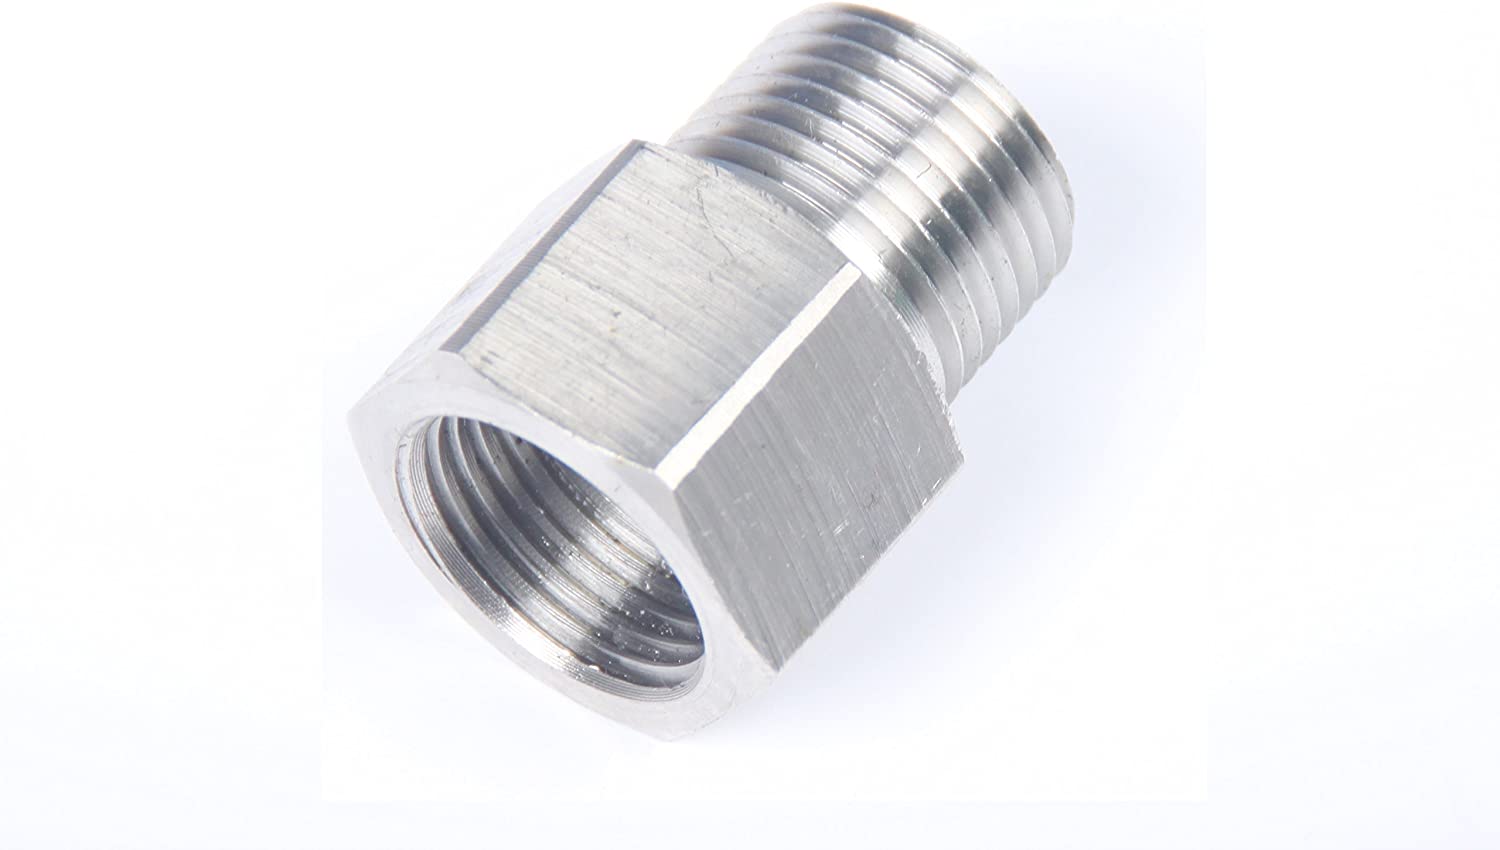 LTWFITTING Bar Production Stainless Steel 316 Pipe Fitting 3/8 Inch Female x 3/8 Inch Male NPT Adapter Air Fuel Water (Pack of 25)